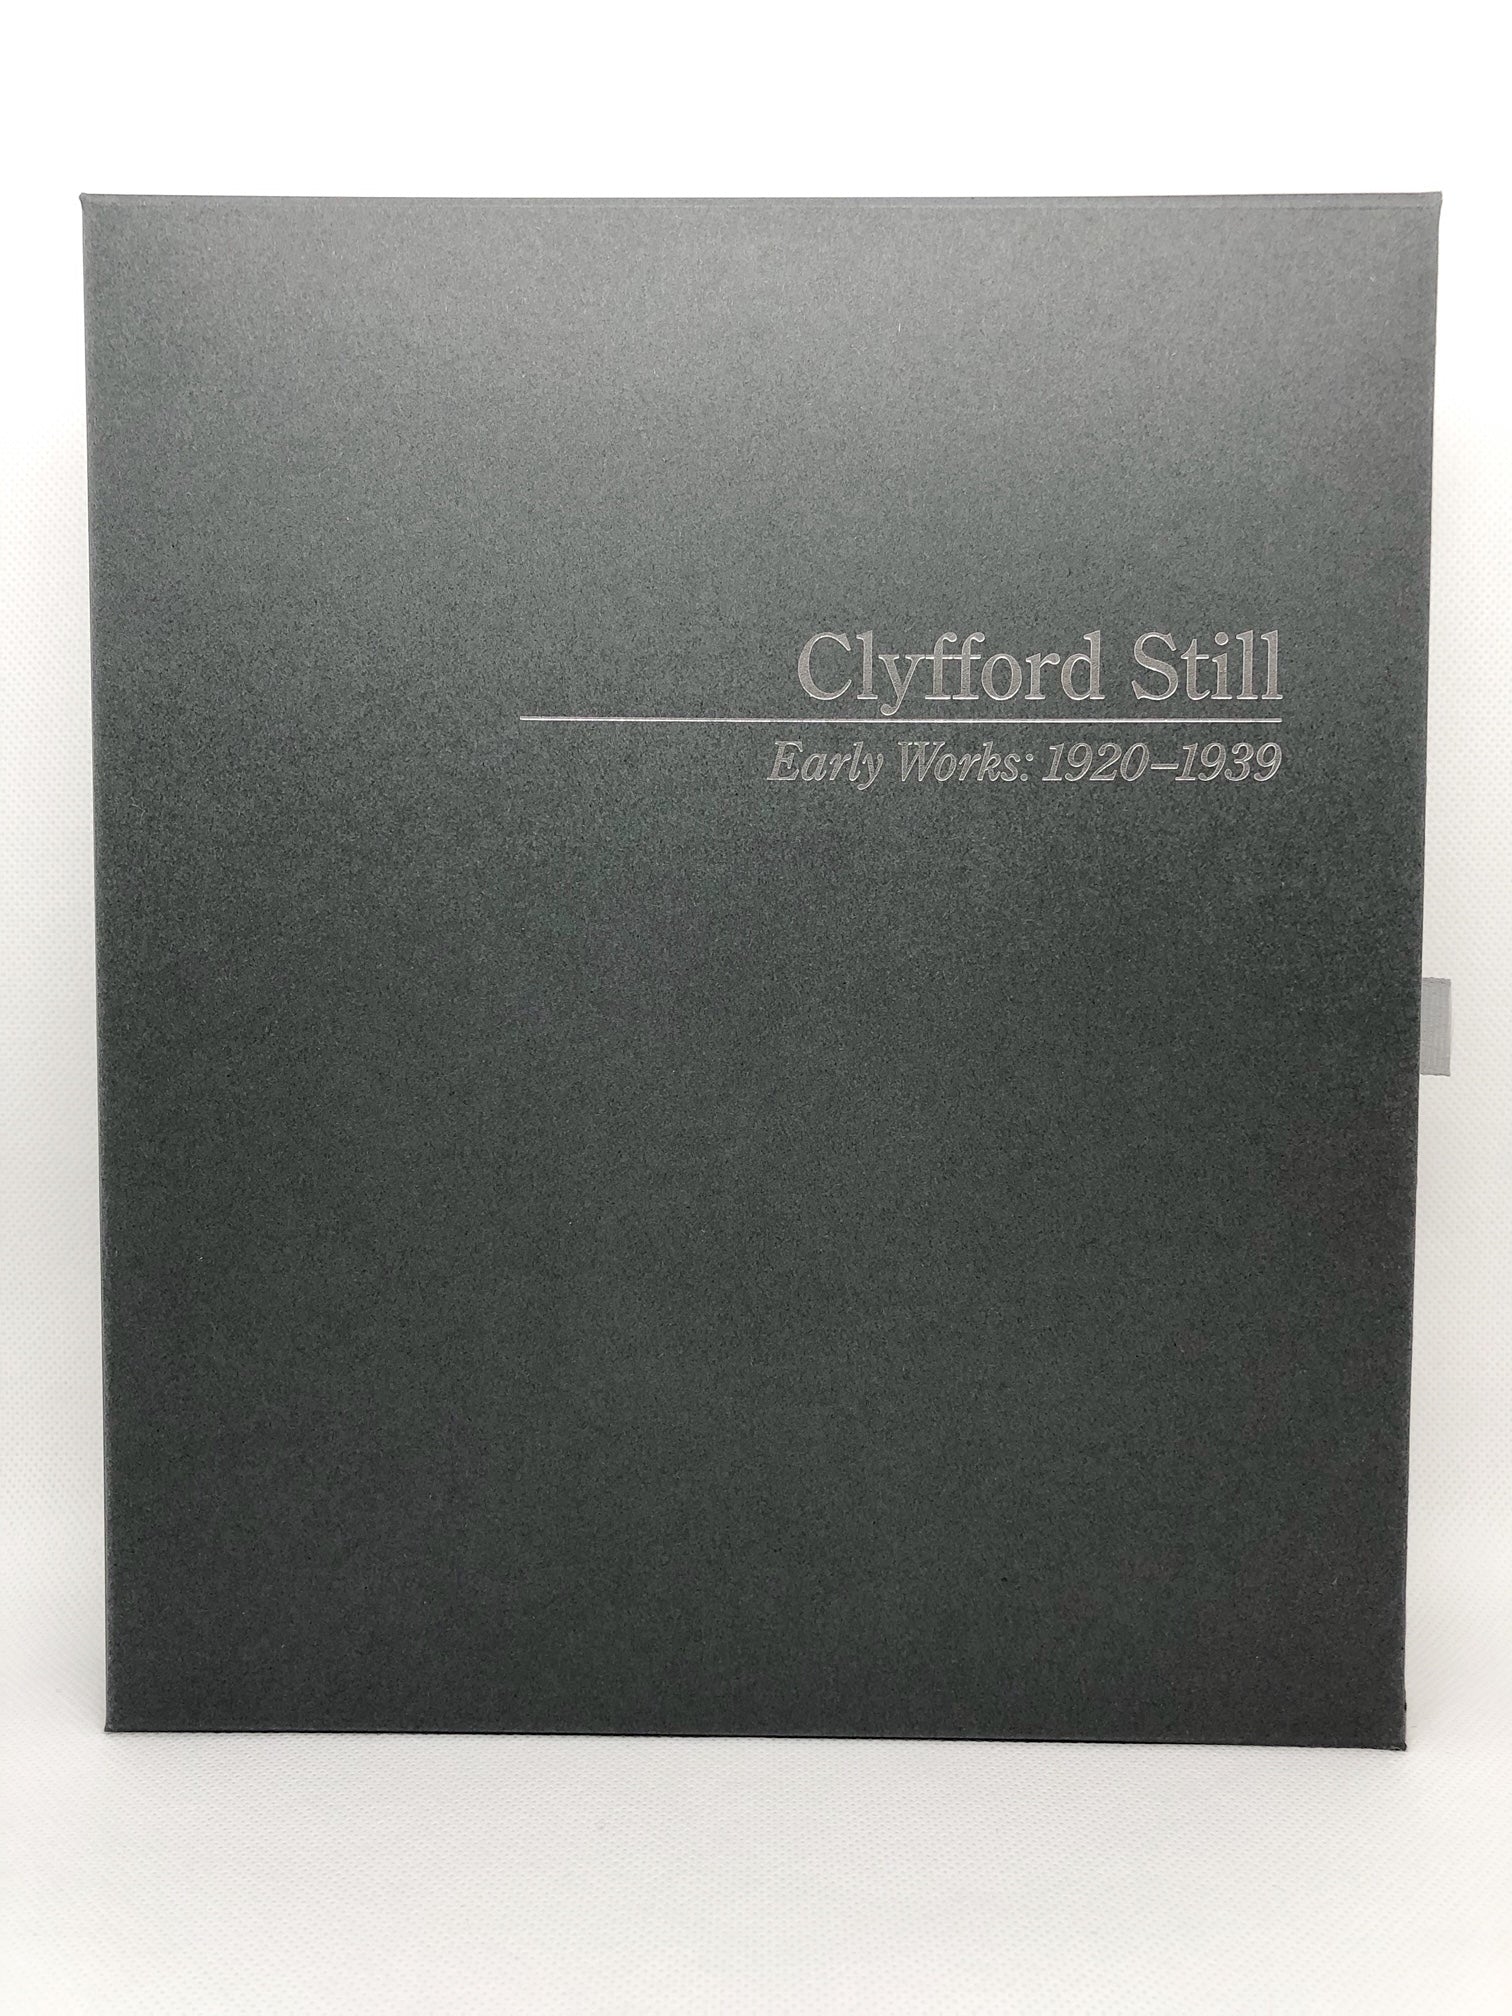 Photo of ‘Clyfford Still, Early Works: 1920-1939 Gift Set’ cover sleeve